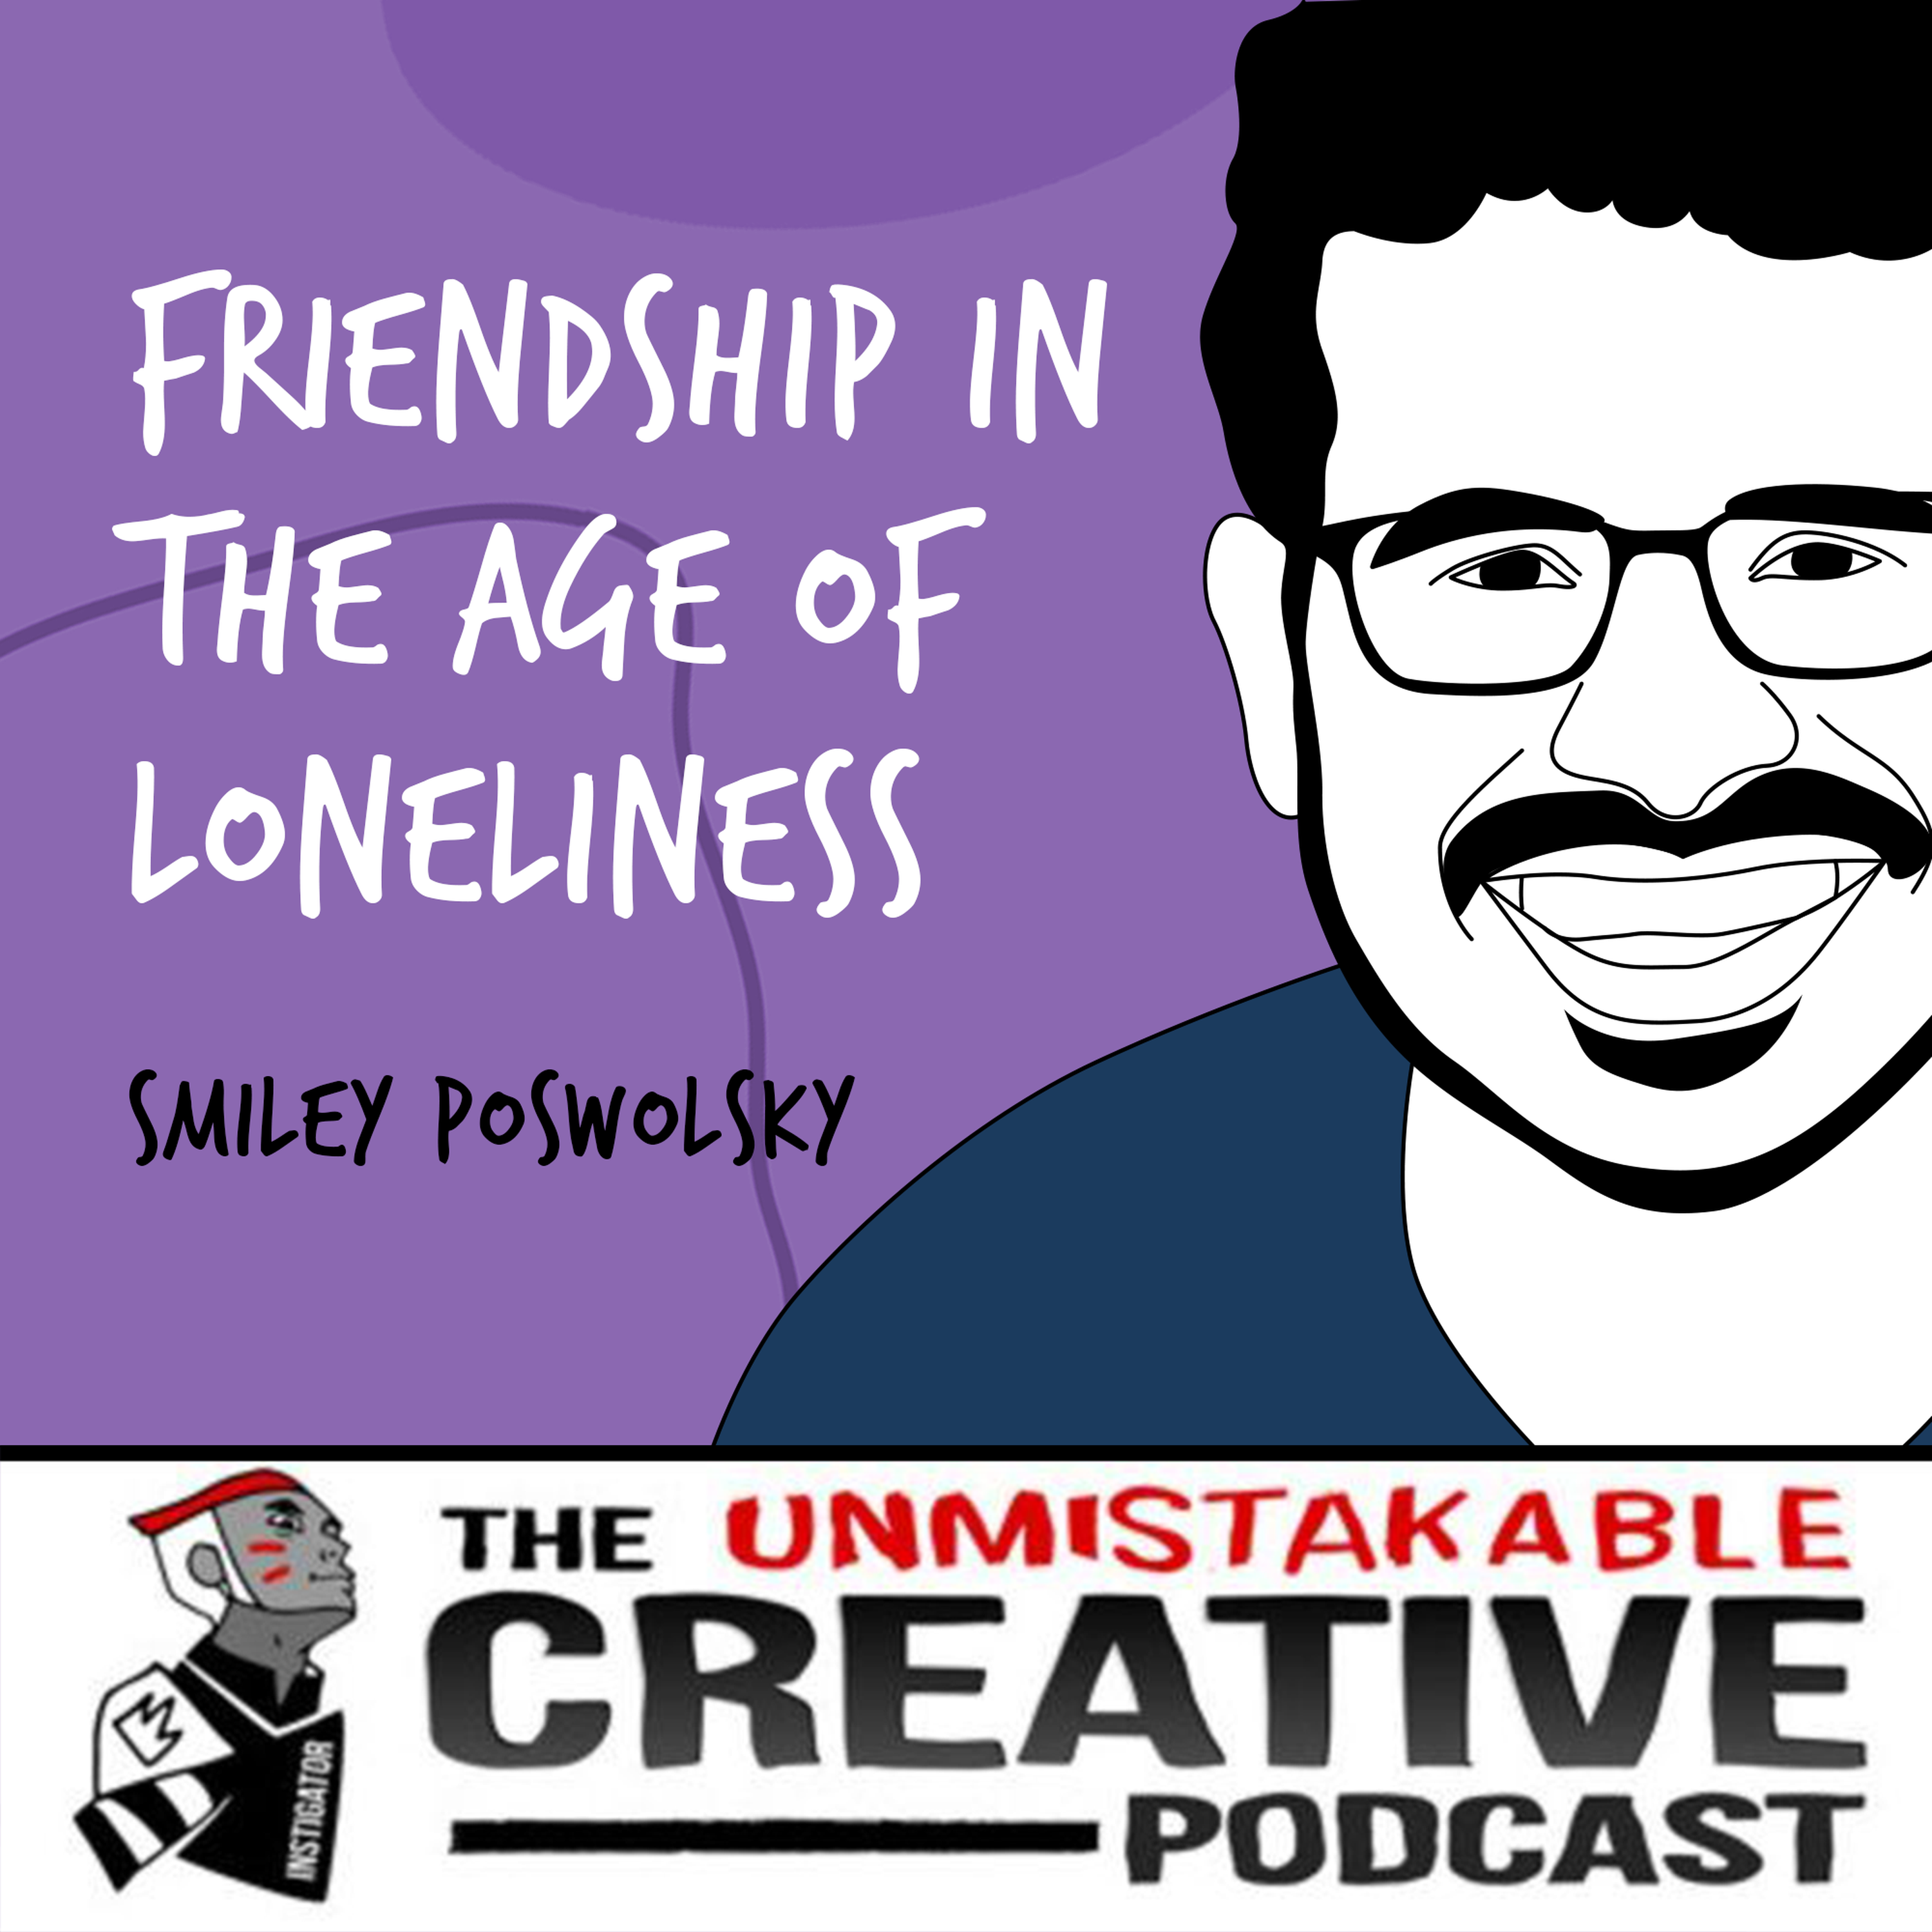 Smiley Poswolsky | Friendship in The Age of Loneliness Image